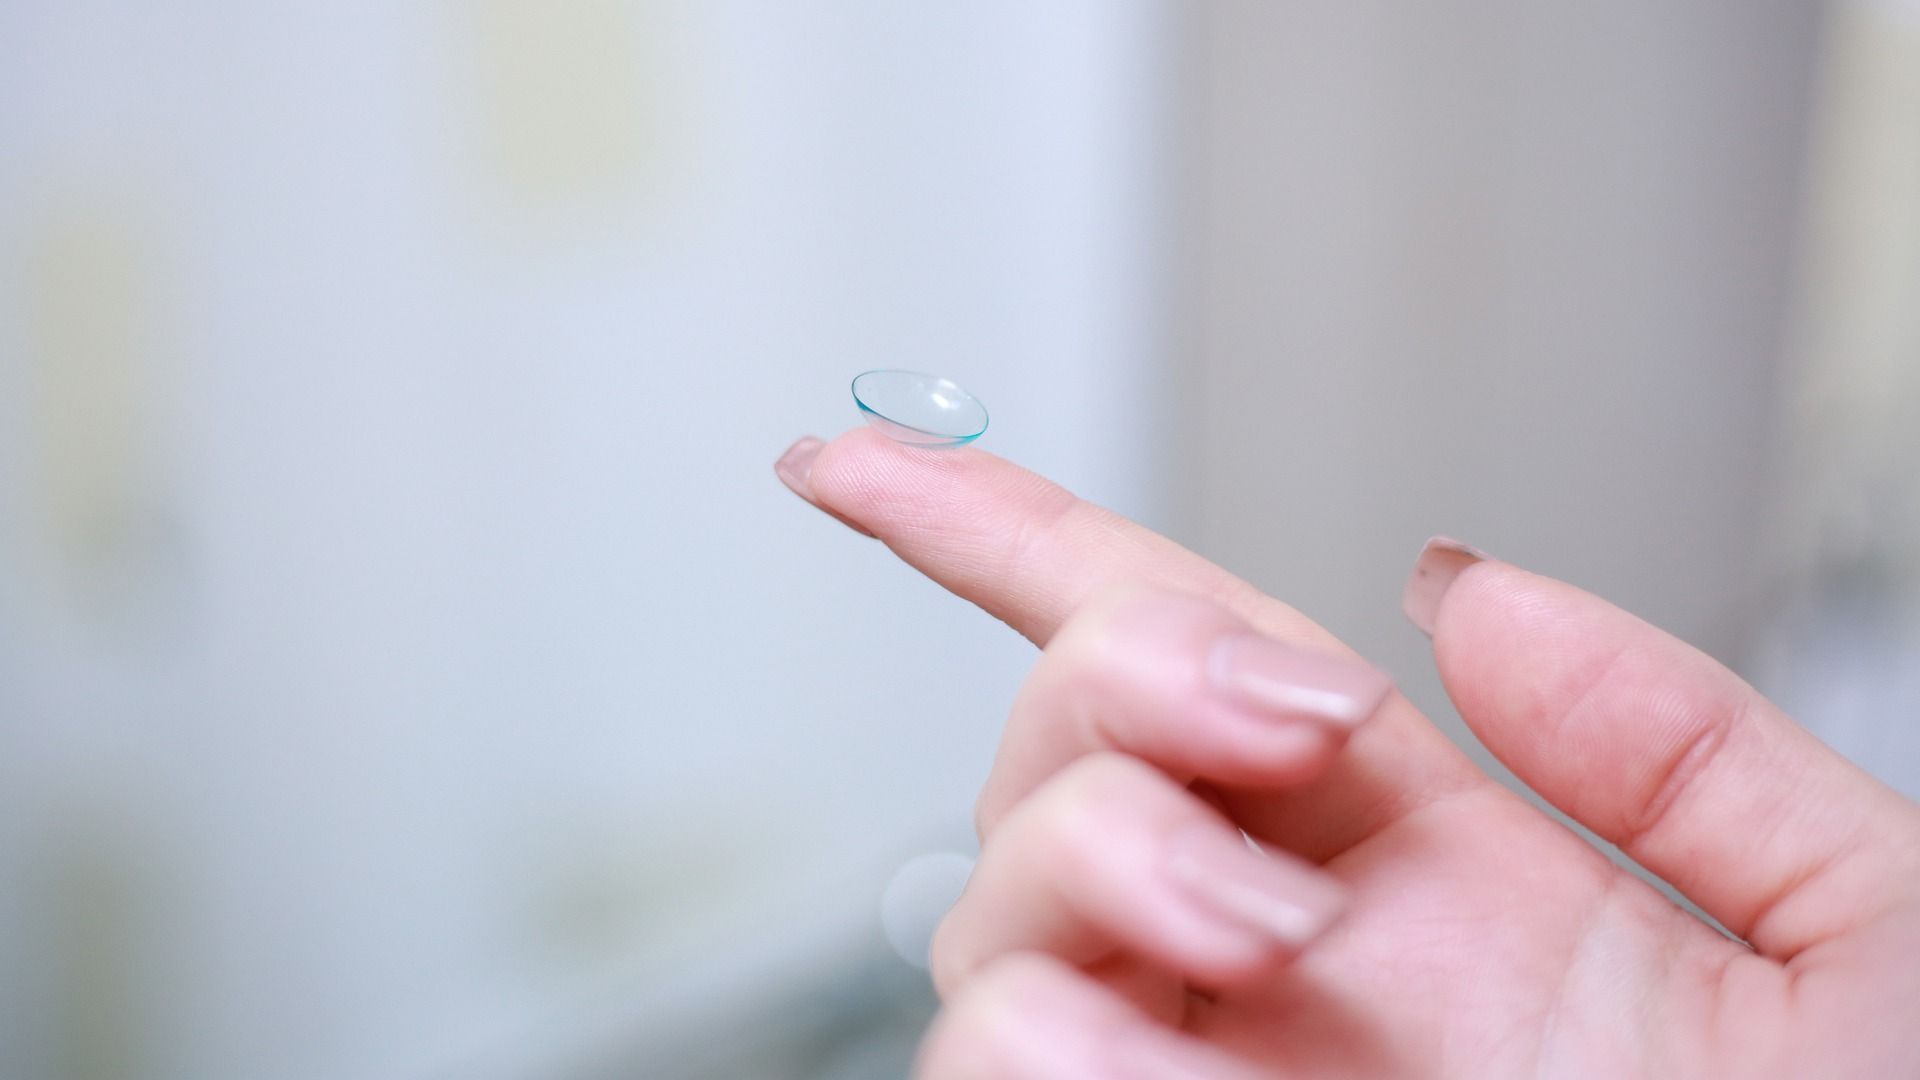 Getting Contact Lenses in Japan